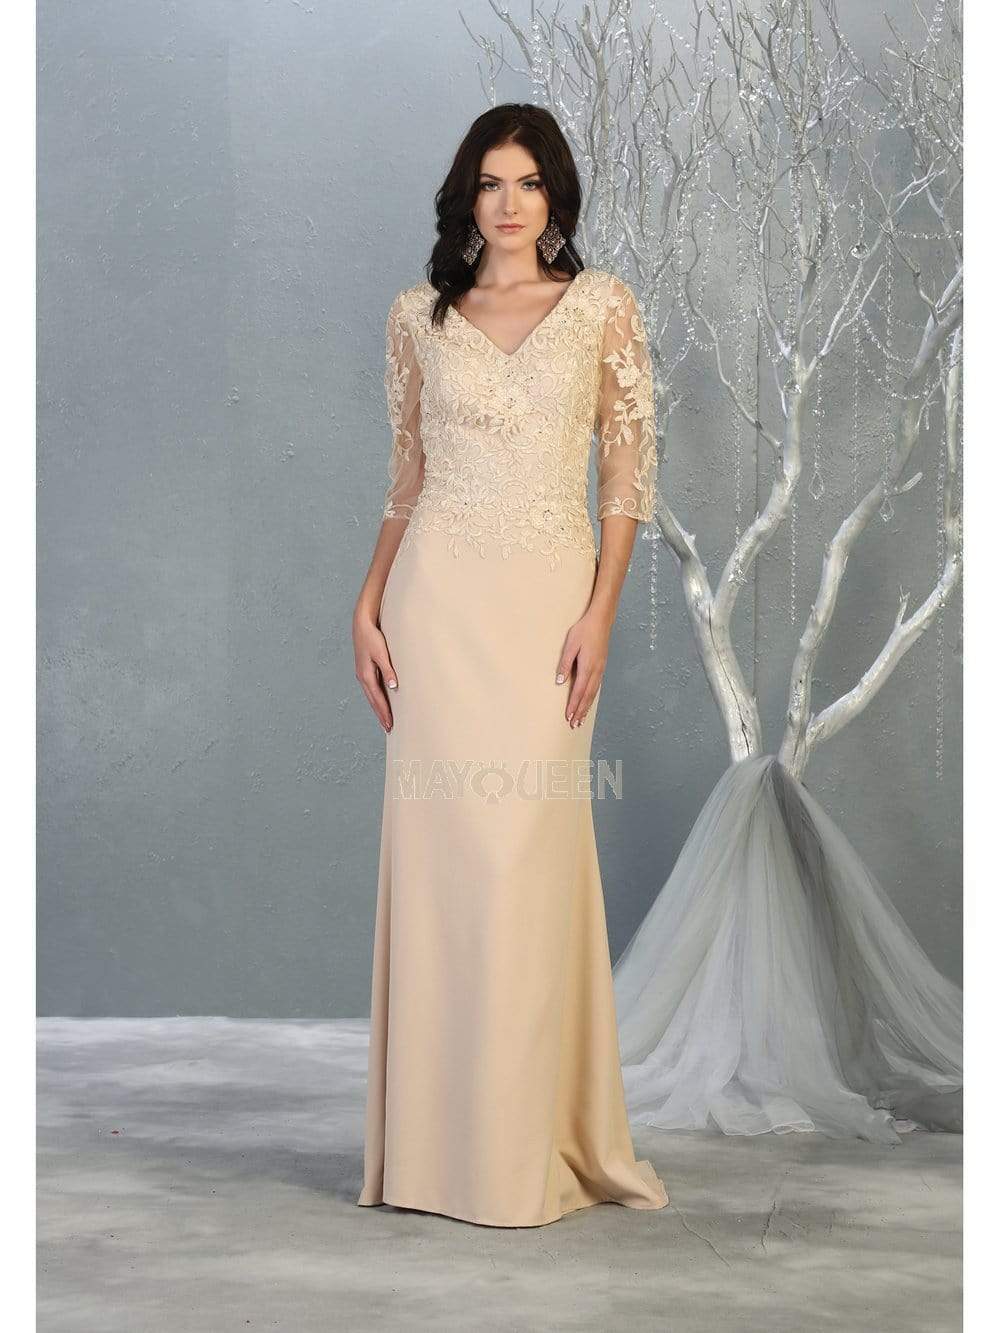 May Queen - MQ1783 Quarter Sleeve Lace Appliqued Trumpet Dress Evening Dresses M / Champagne